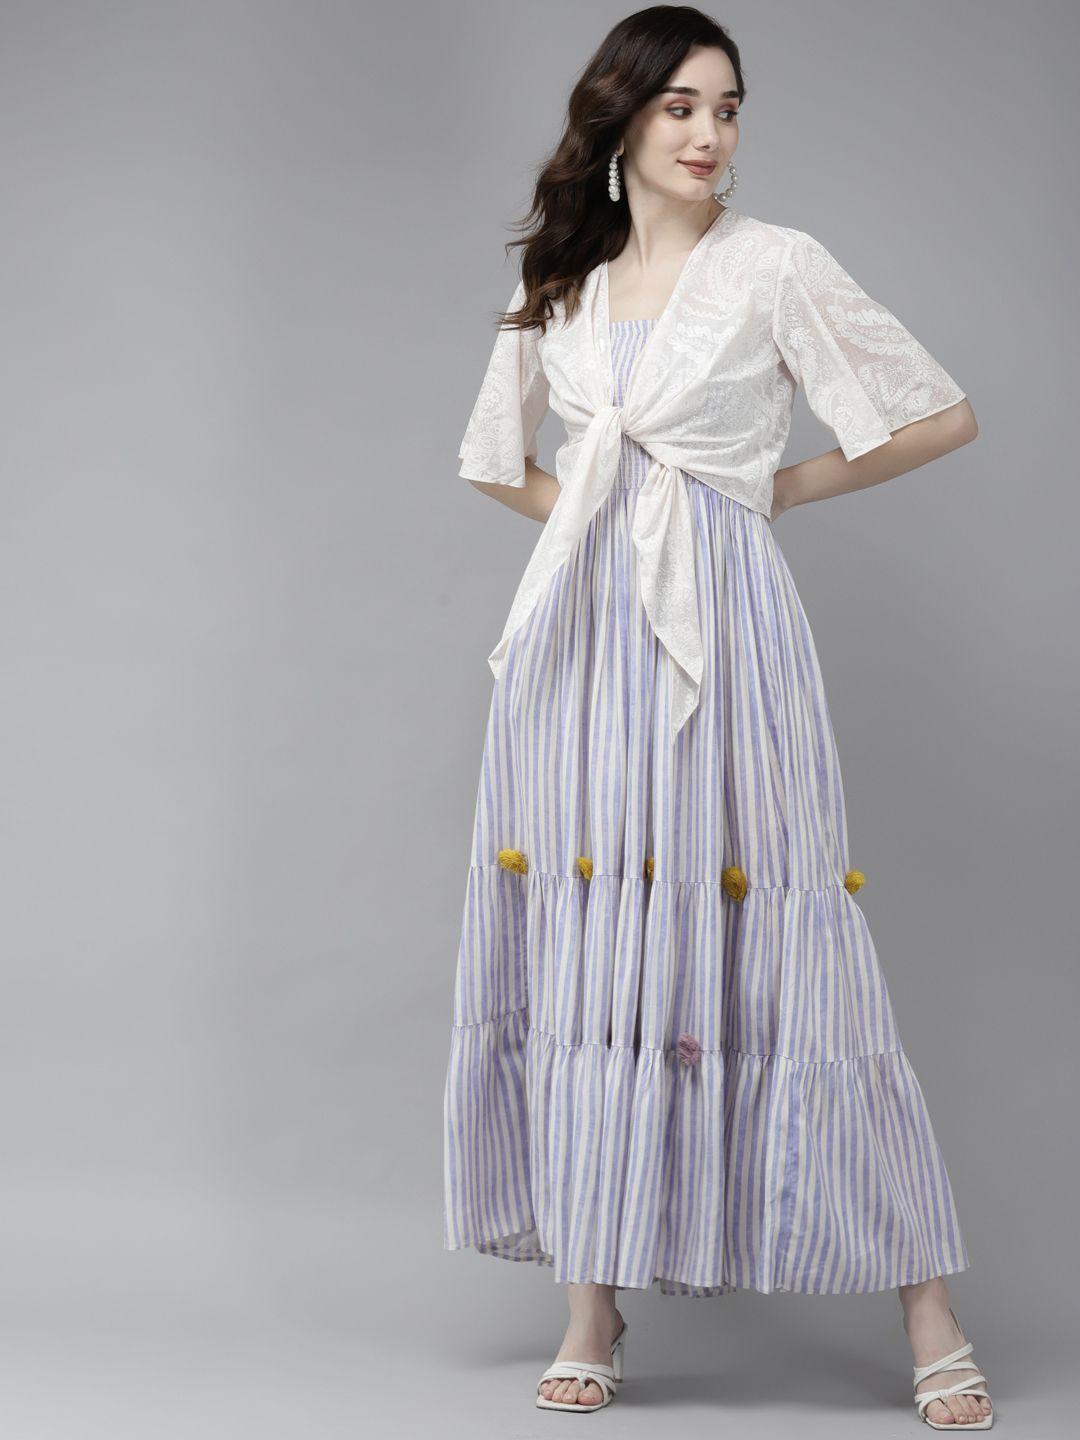 w-blue-&-off-white-striped-ethnic-maxi-dress-with-jacket